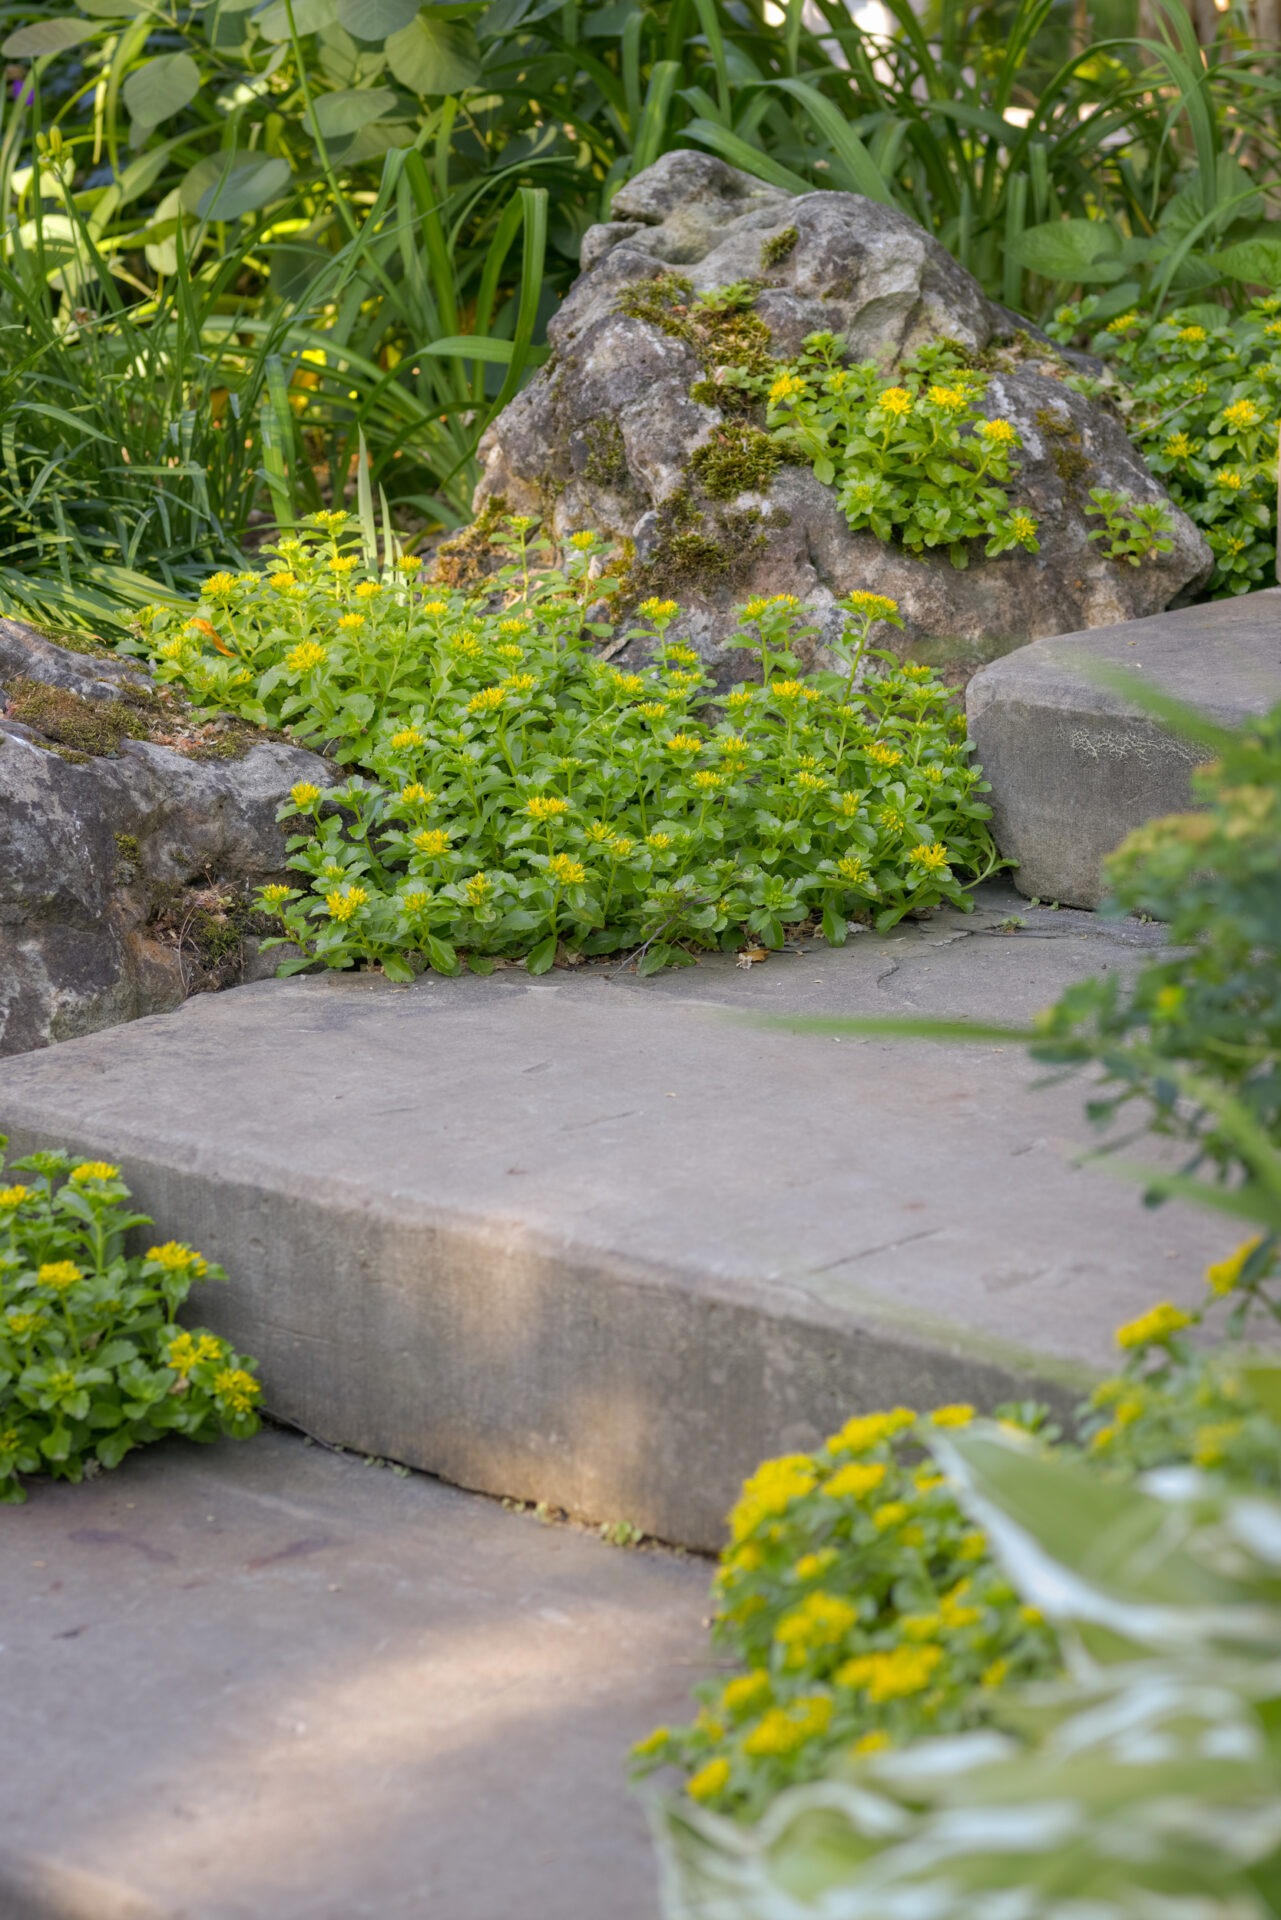 A garden scene with green foliage, yellow flowering plants, moss-covered rocks, and concrete steps, portraying a tranquil natural setting.